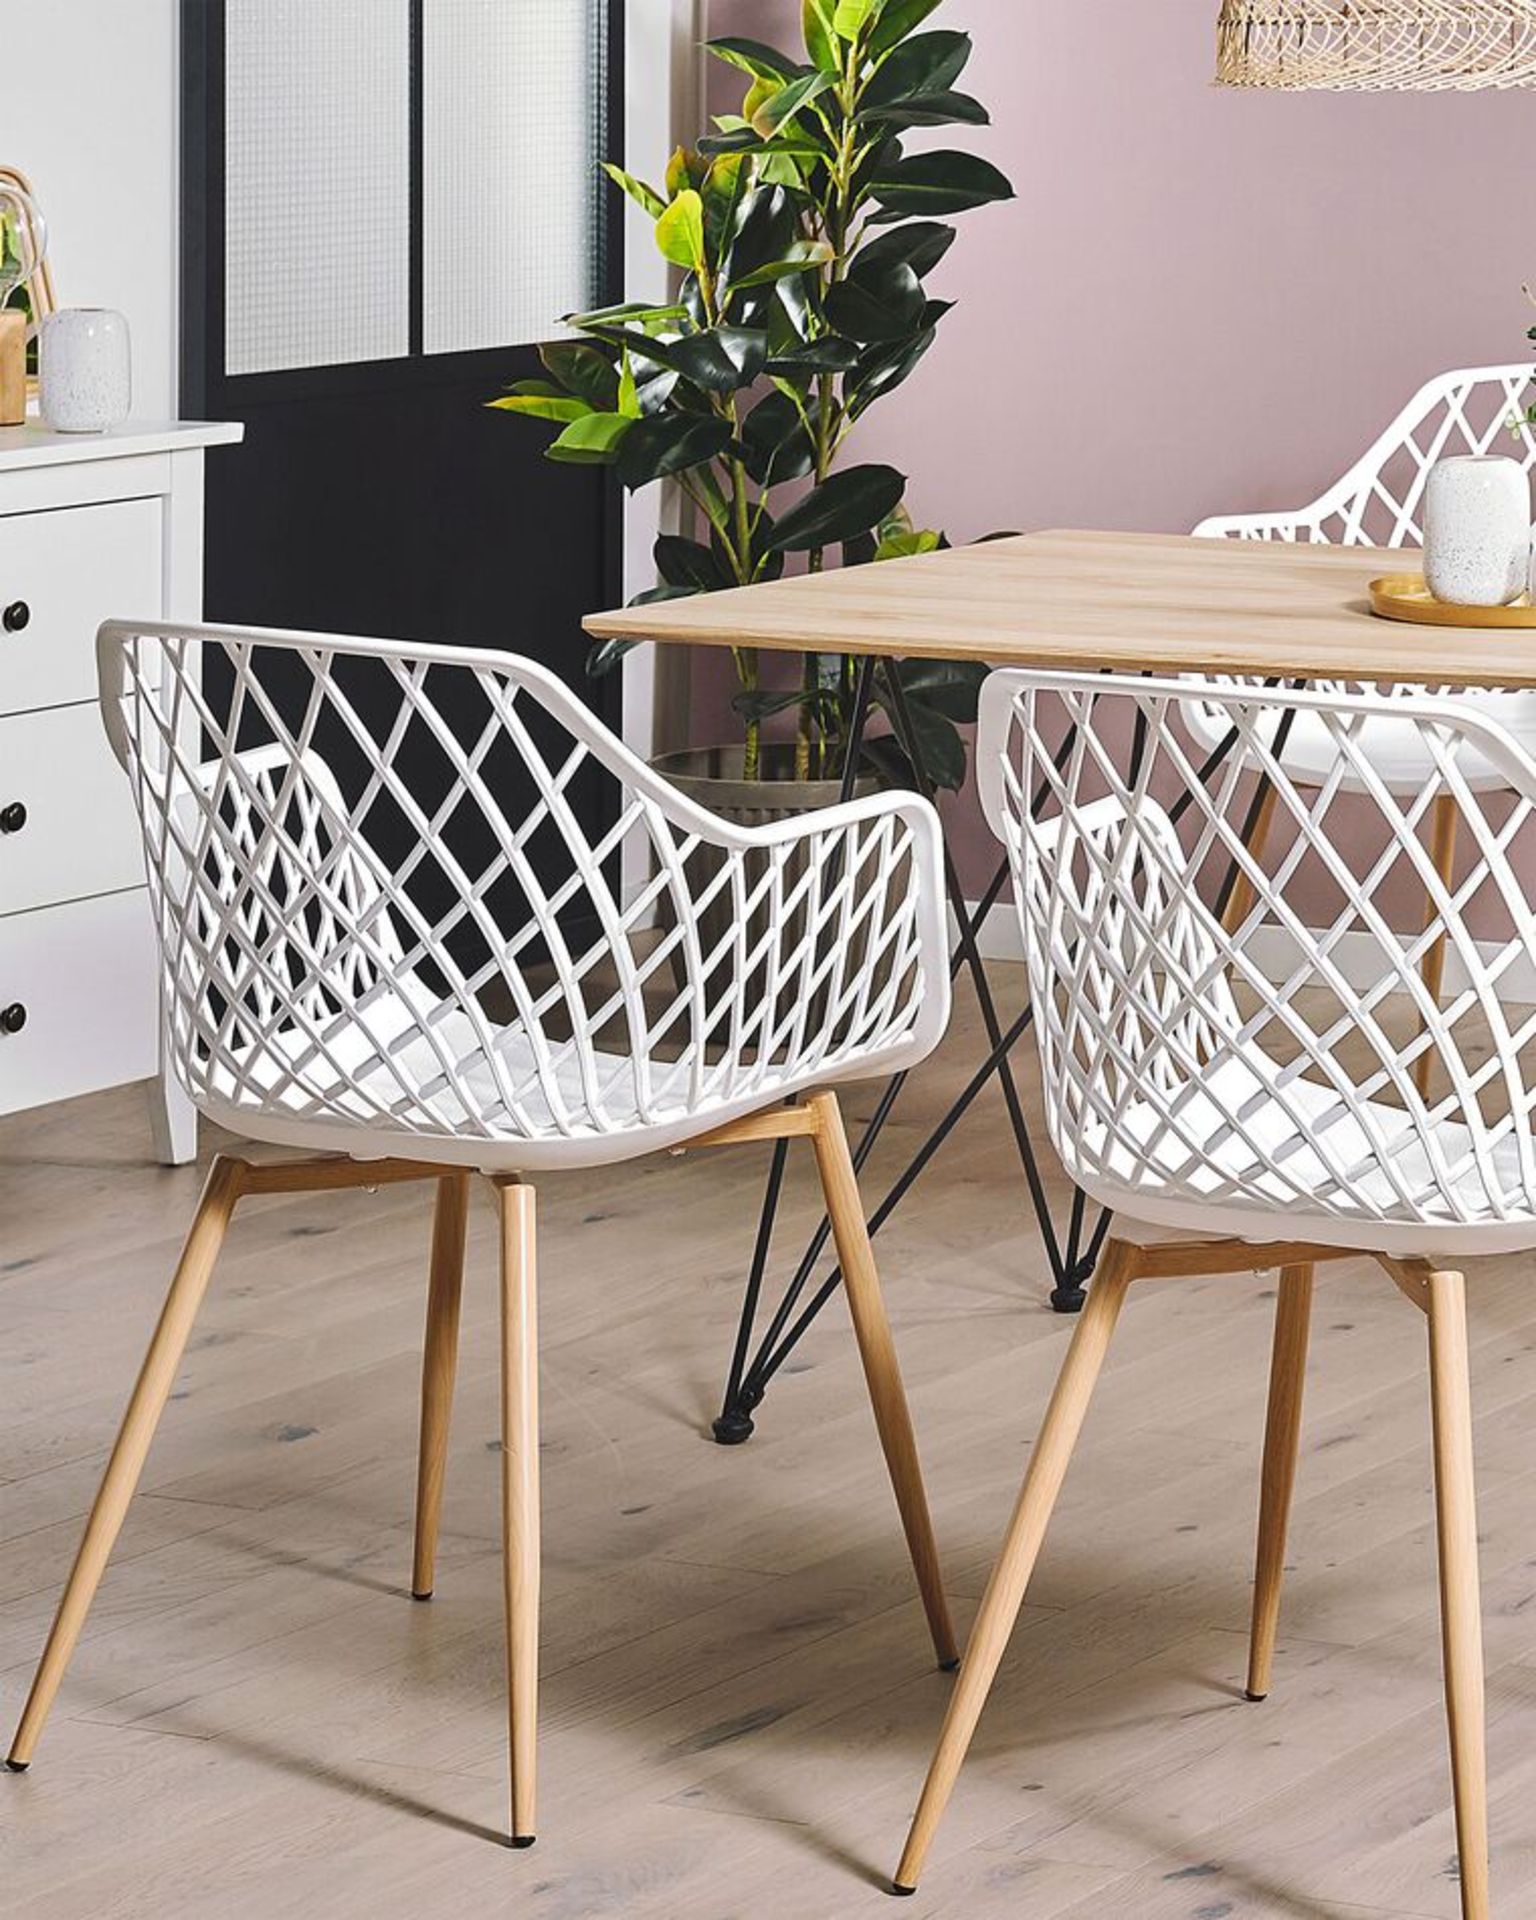 Nashua Set of 2 Dining Chairs White. - R14.17. RRP £199.99. This set of chairs works wonderfully